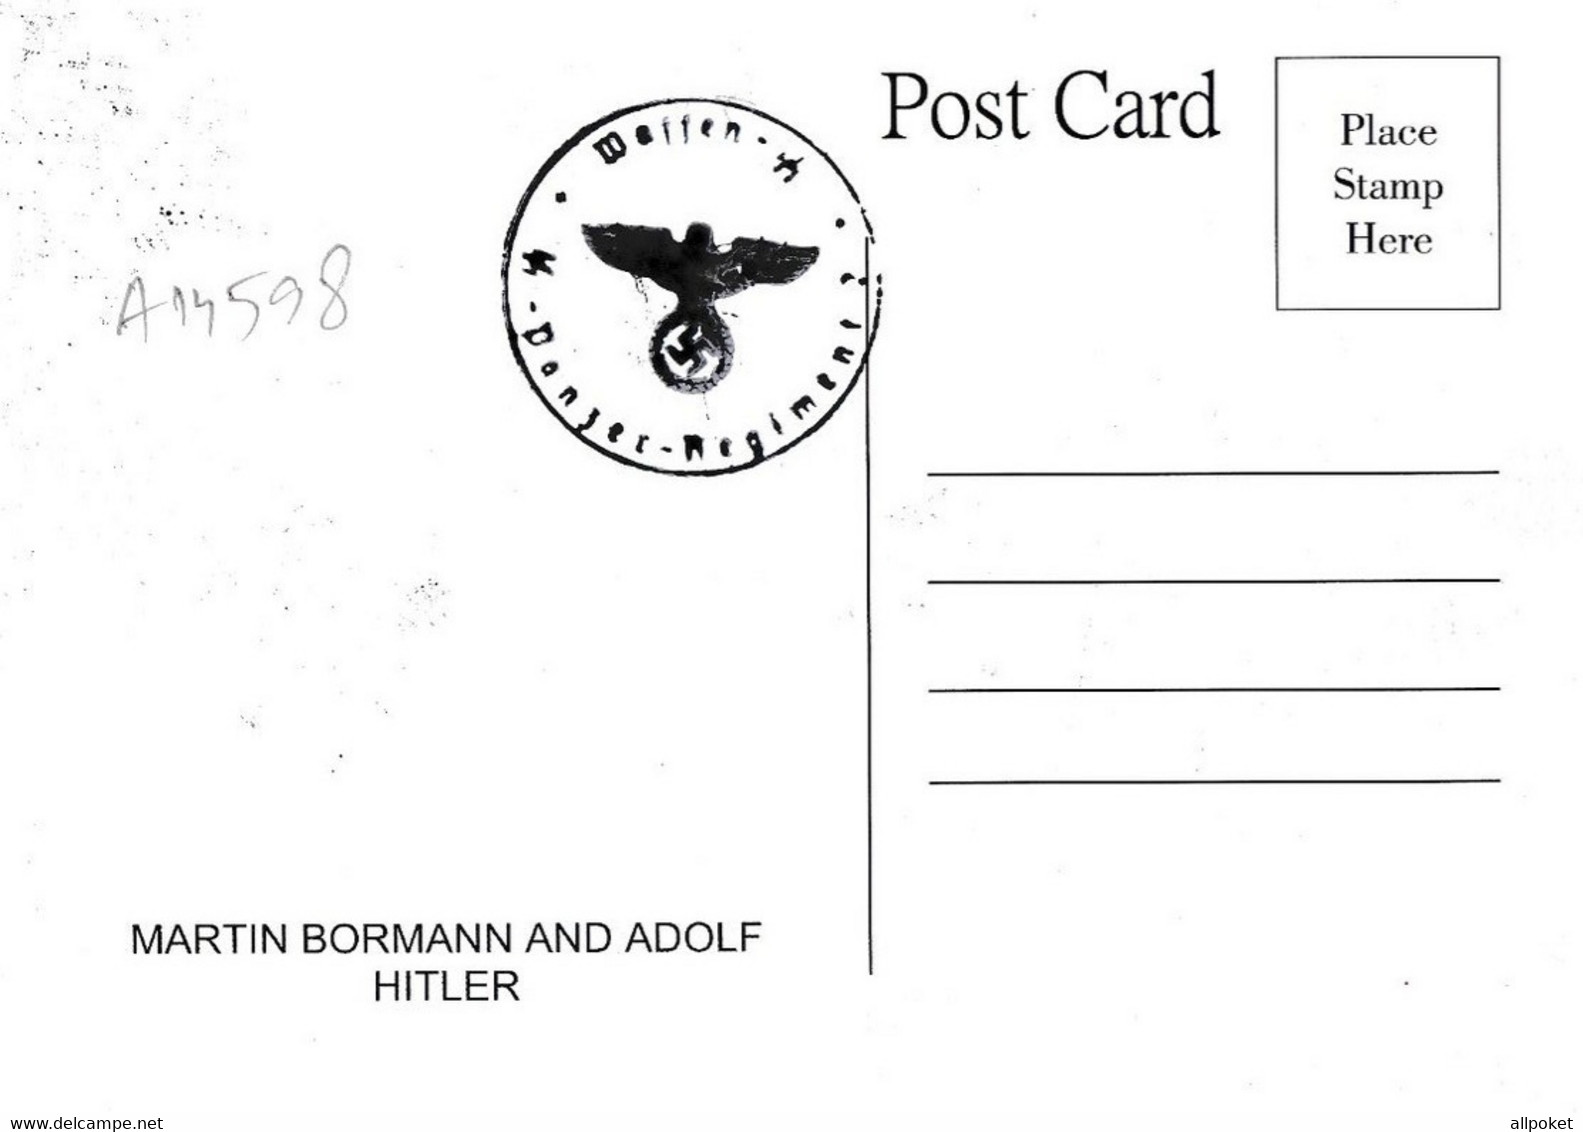 A14598 - MARTIN BORMANN AND DICTATOR GERMANY ADOLF HITLER  POSTCARD - Personnages